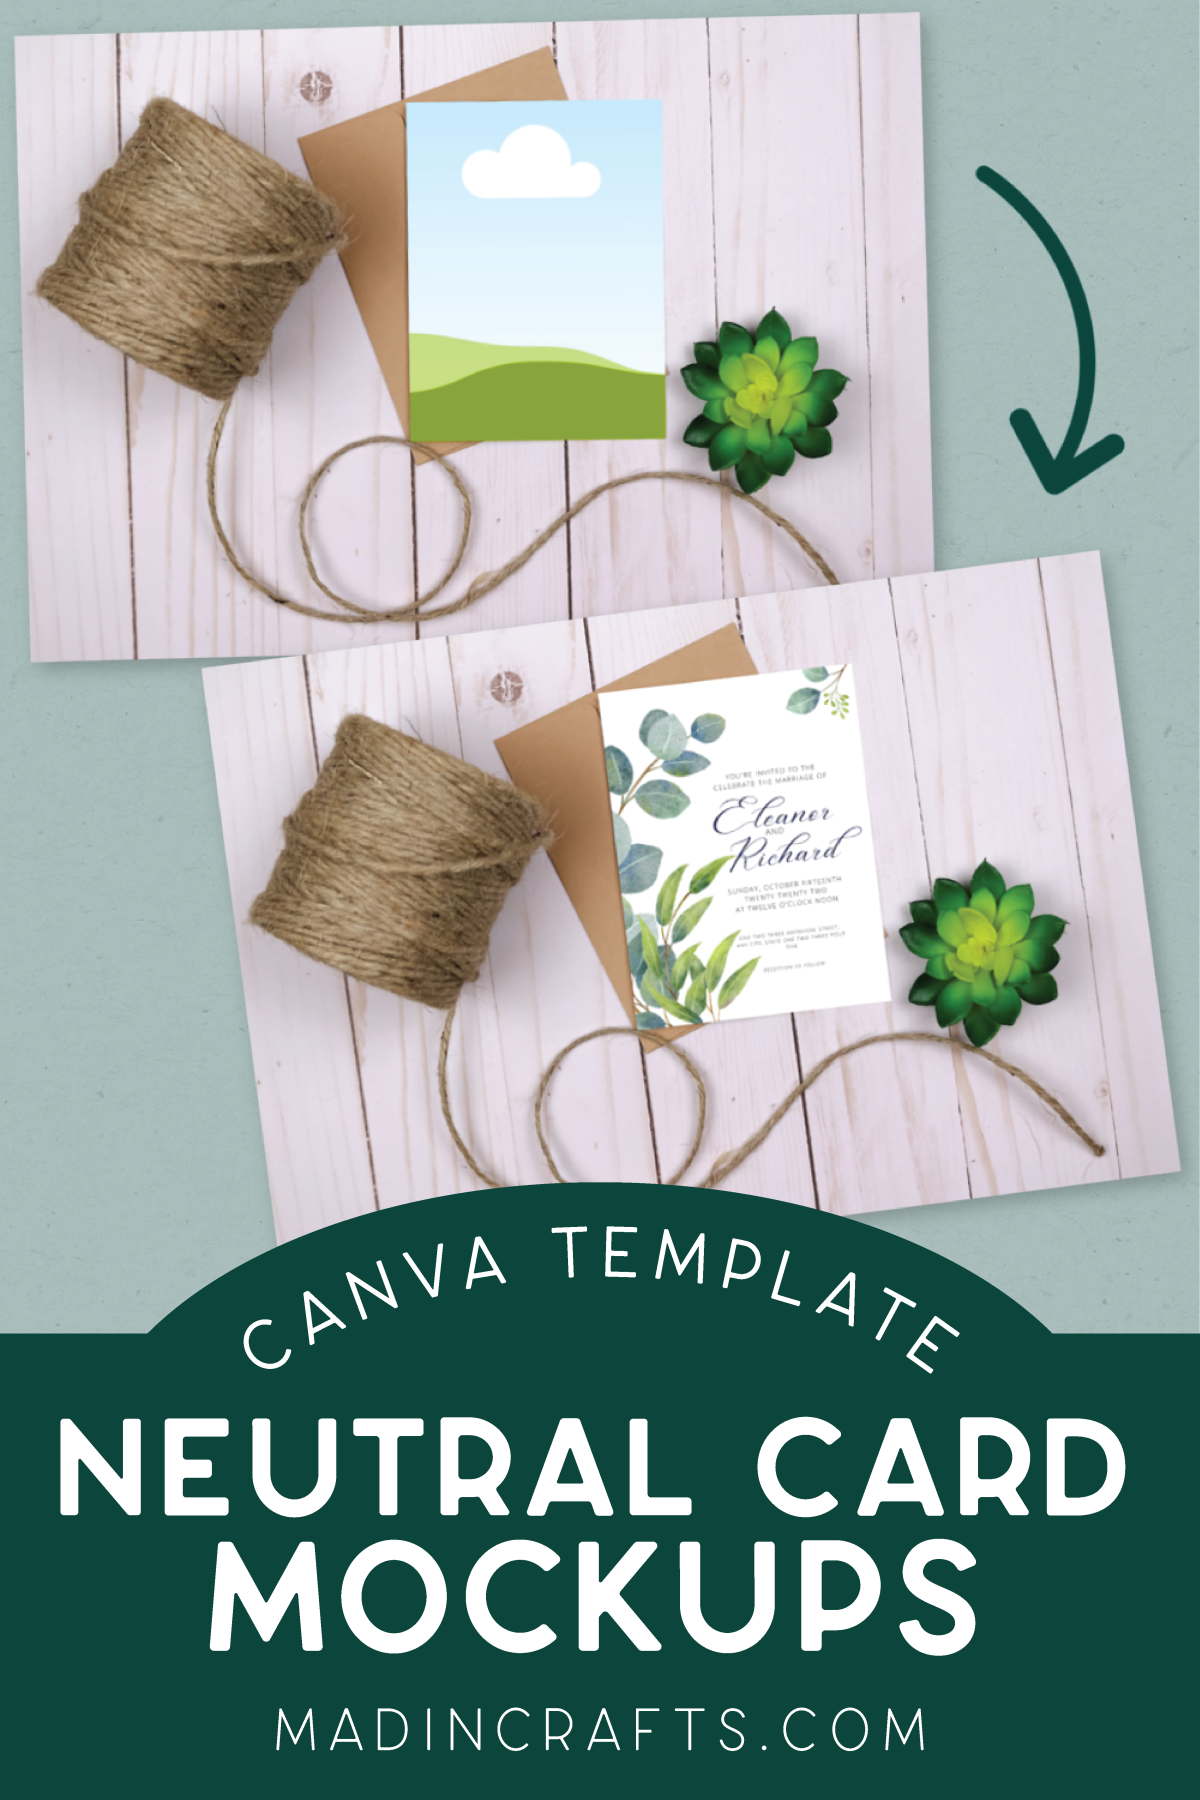 Graphic comparing the Canva mockup to a finished design